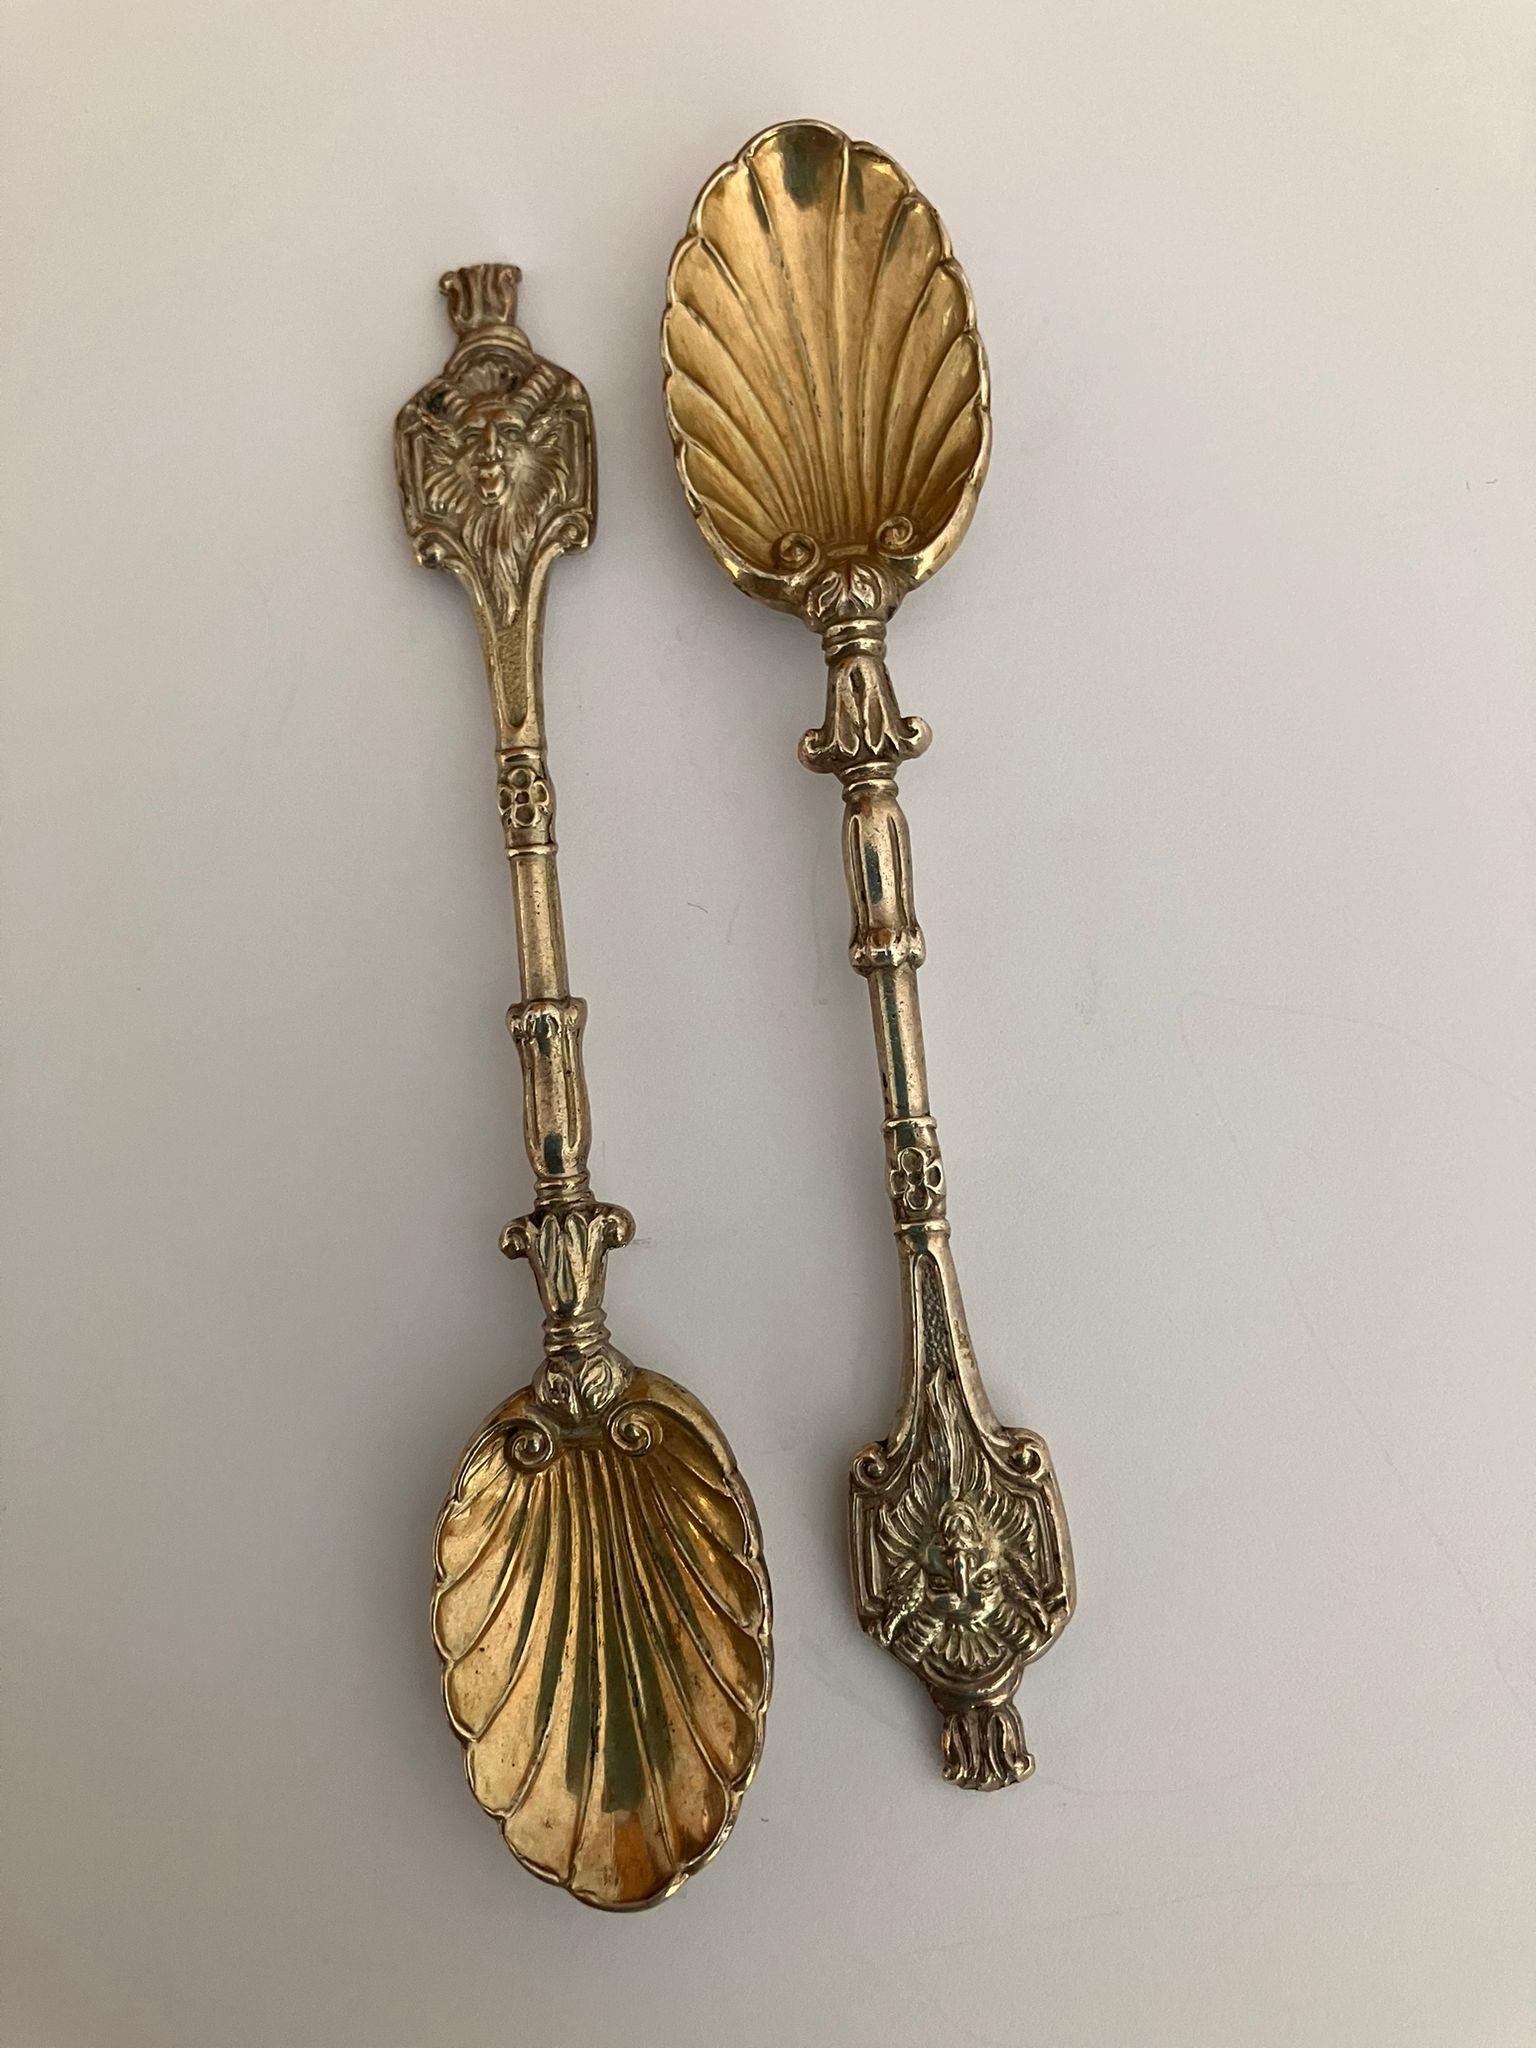 Pair of SILVER Condiment SPOONS with Gilded Leaf Bowls. Cast in heavy gauge Silver. Hallmark for